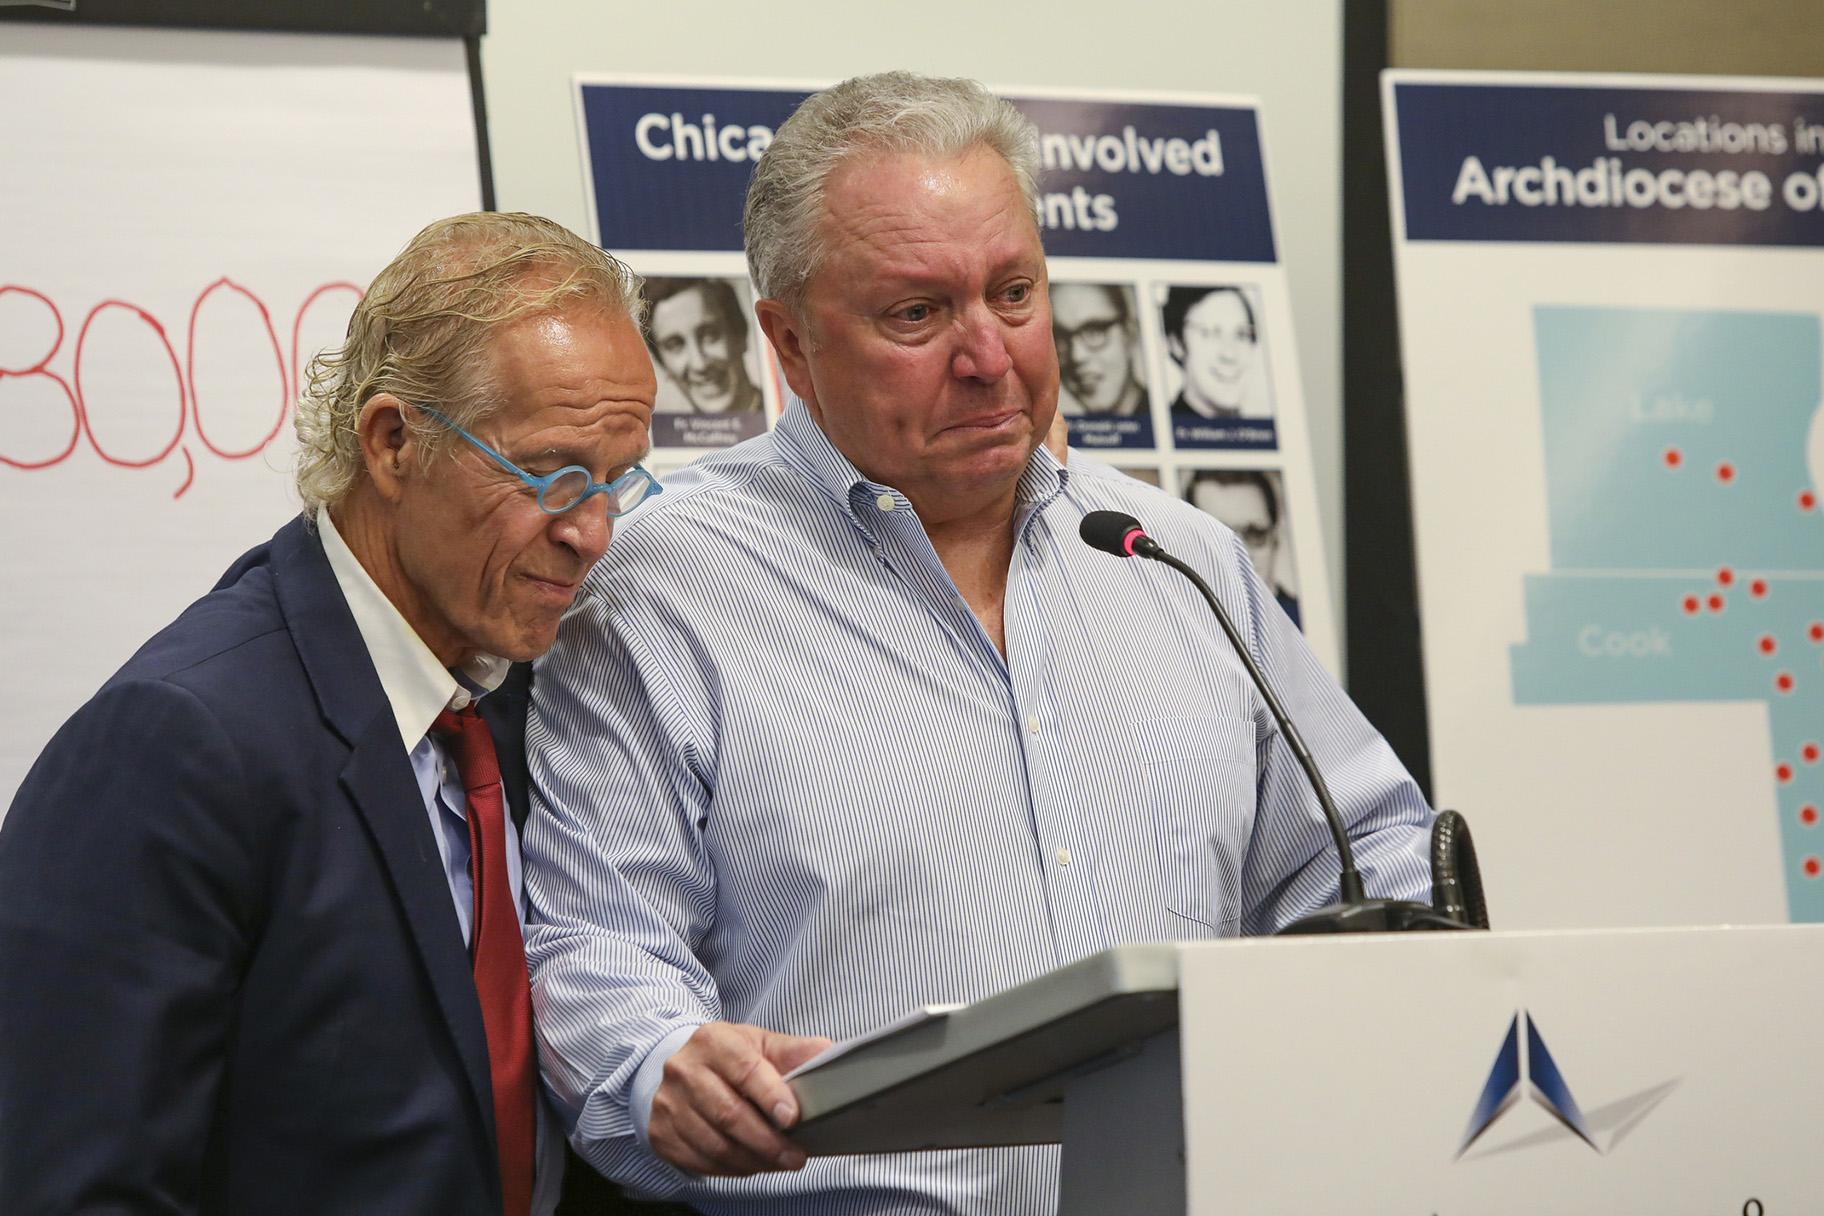 Jeff Anderson, an attorney for victims of sexual abuse by clergy, is joined by abuse victim Joe Iacono as he speaks during a press conference in Chicago, Sept. 17, 2019. (AP Photo / Teresa Crawford)